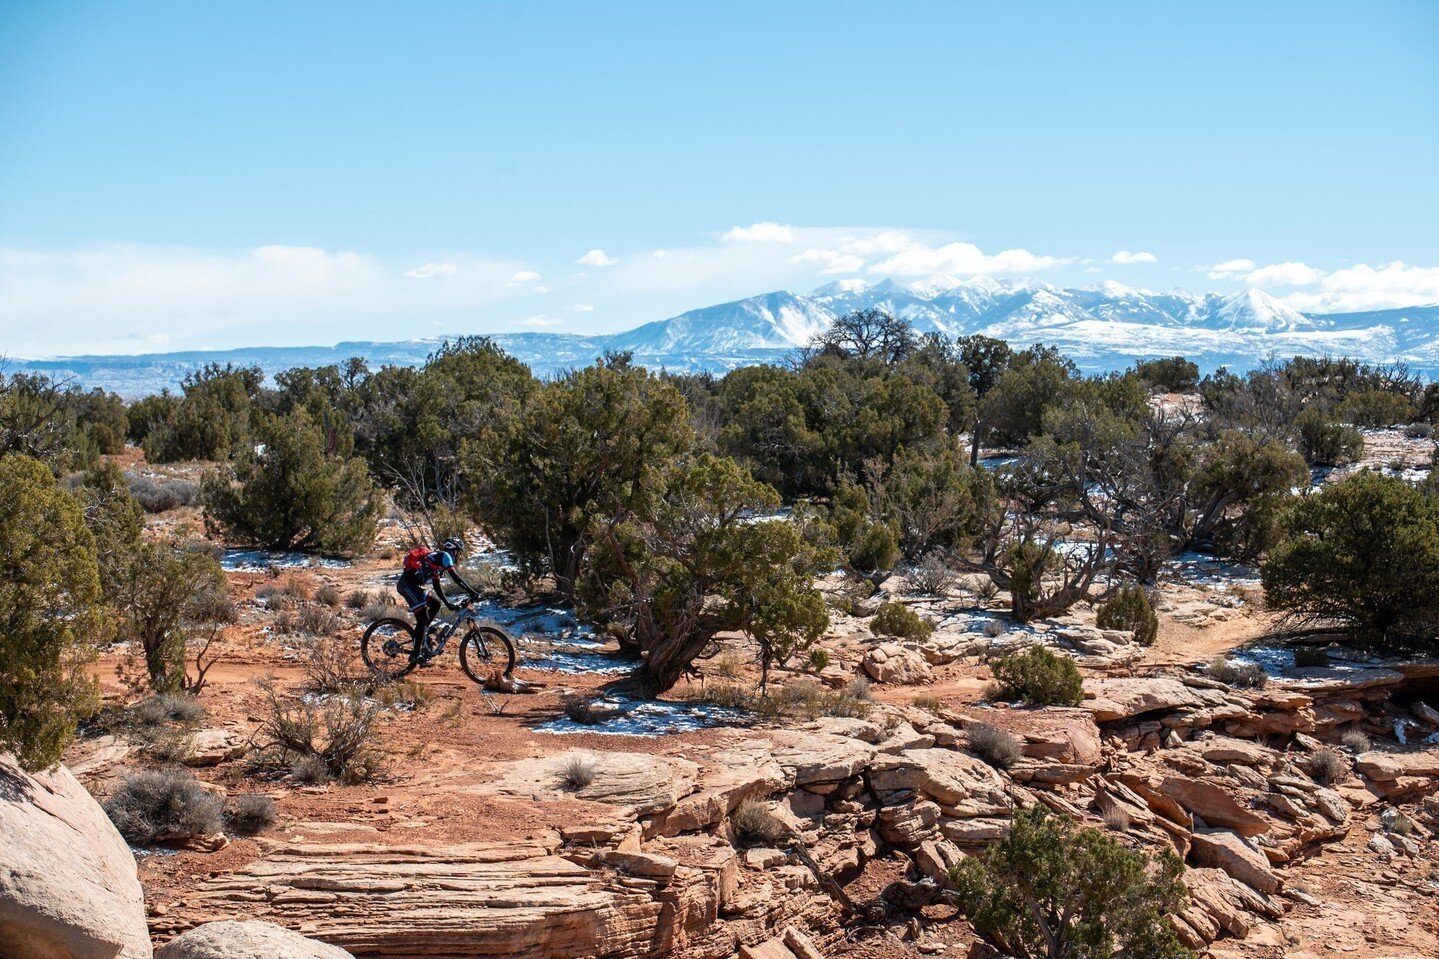 It's almost time for the Easter long weekend! Where are you planning to ride? We hope you make the most of the holiday on two wheels and share your biking adventures with us!⁠
⁠
#LongWeekend #RideYourBike #BikeAdventures #WhereAreYouRiding #StokedOnB